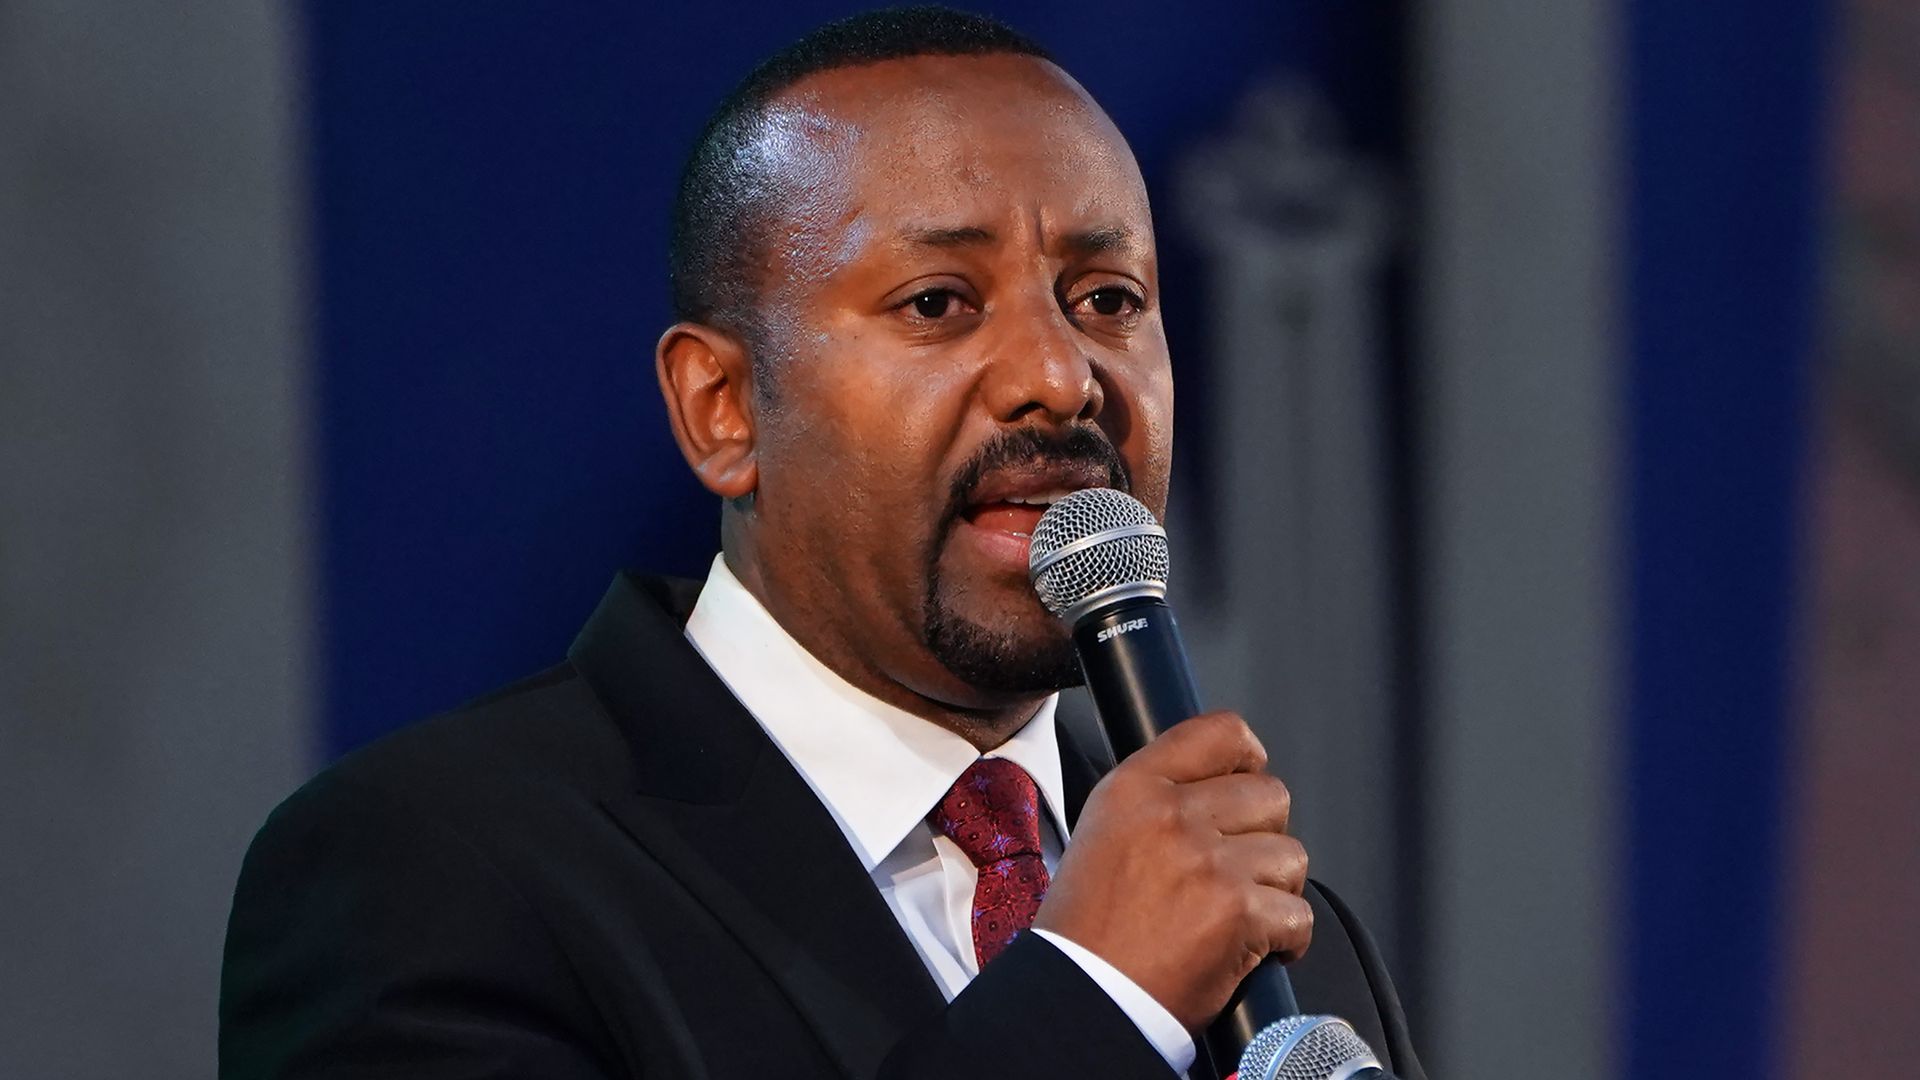 Ethiopian Prime Minister Abiy Ahmed speaks at the inauguration of the newly remodeled Meskel Square on June 13, 2021 in Addis Ababa, Ethiopia.